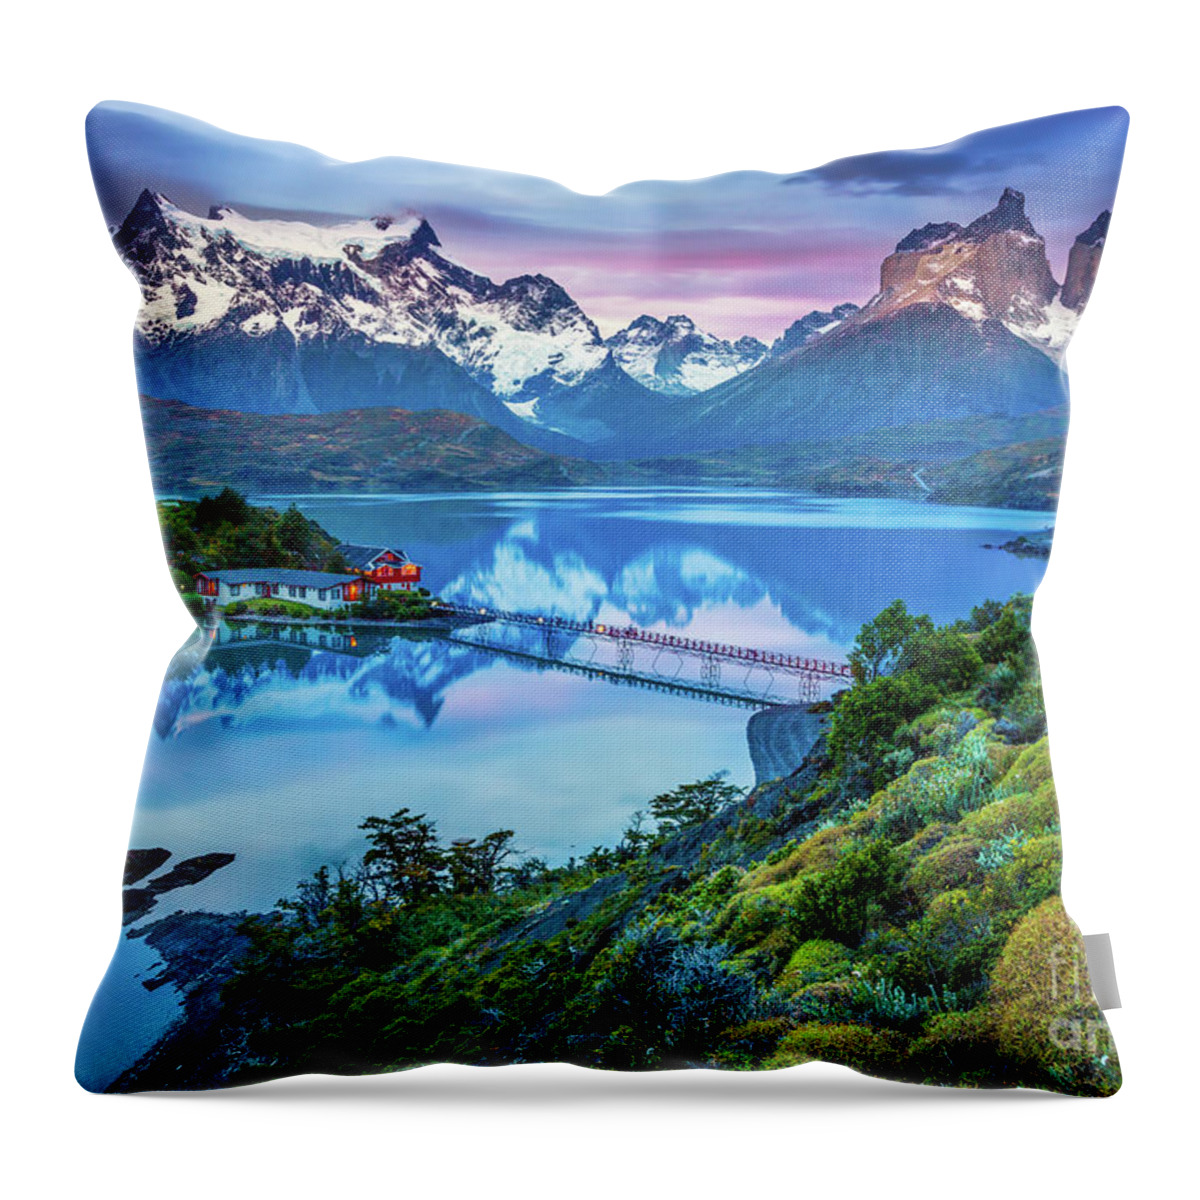 America Throw Pillow featuring the photograph Patagonia Island by Inge Johnsson